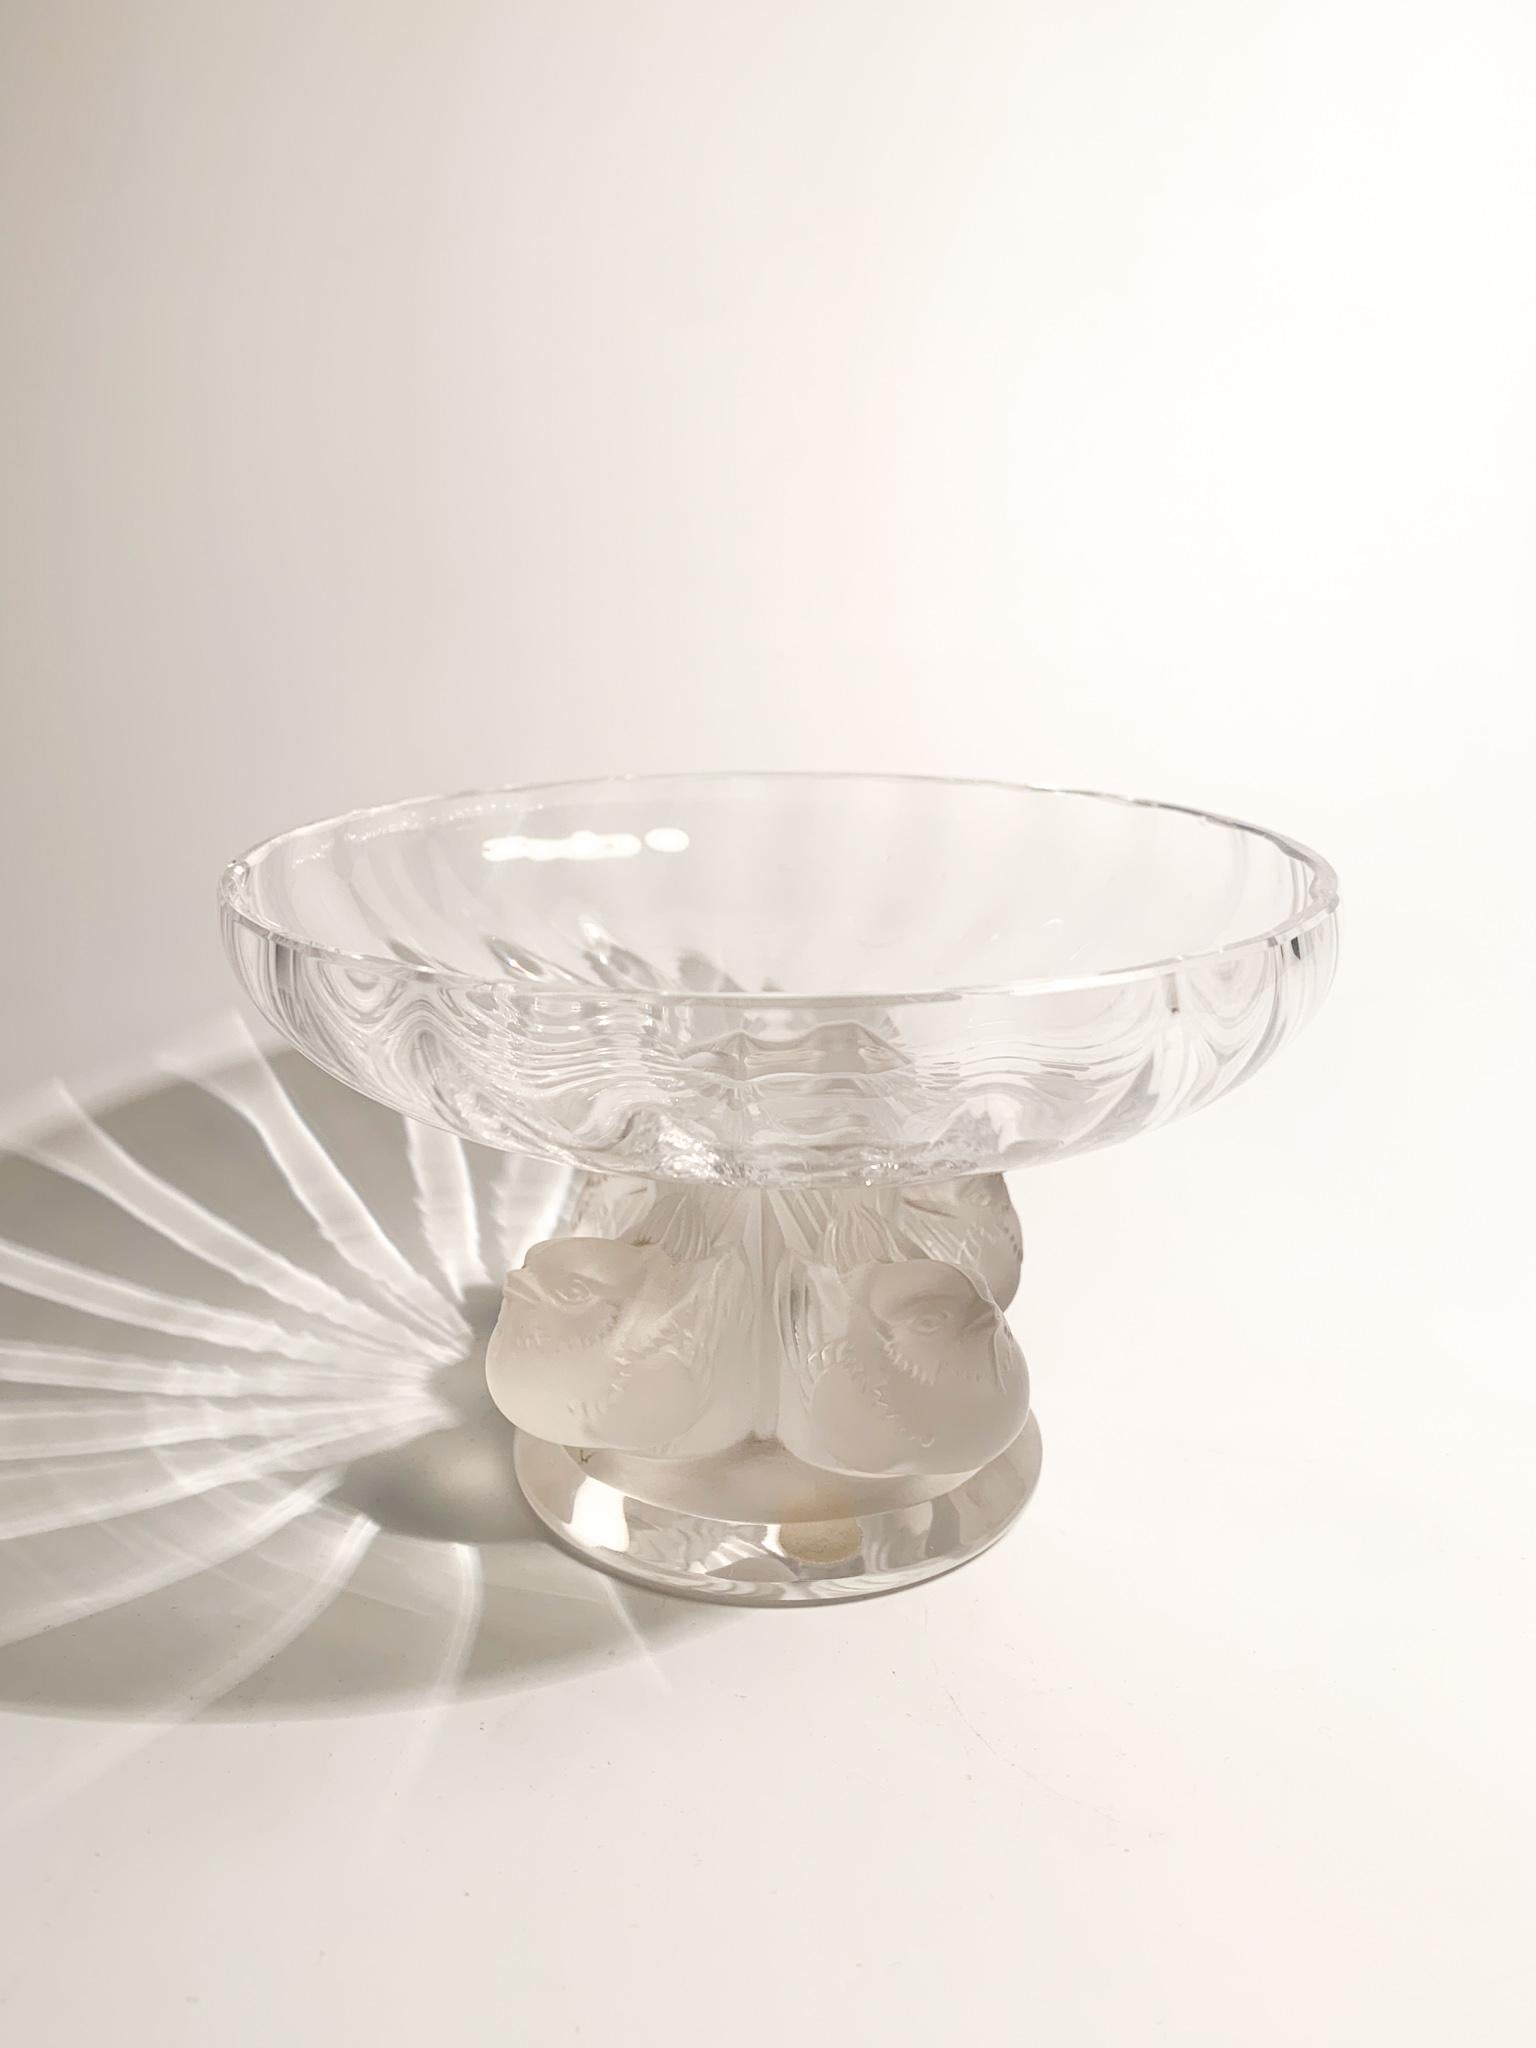 Lalique crystal cup, Nogent Cup model with hand-sculpted birds, made in the 1960s

Ø cm 14 h cm 8

I Lalique crystals born from the idea of René Lalique, a French jeweler and glassmaker. 

During his career he collaborated with various